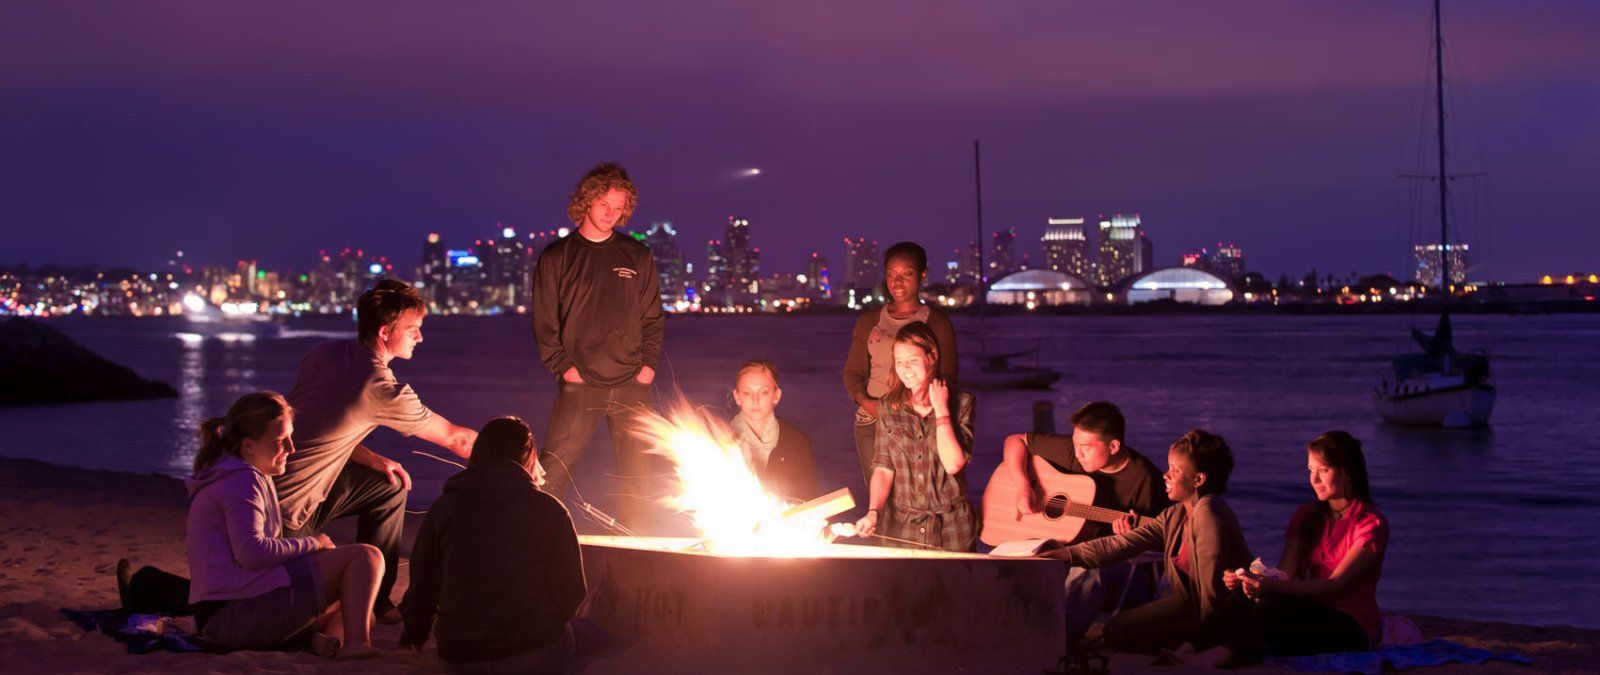 PLNU students have a beach bonfire at night and play music while at Shelter Island in San Diego.